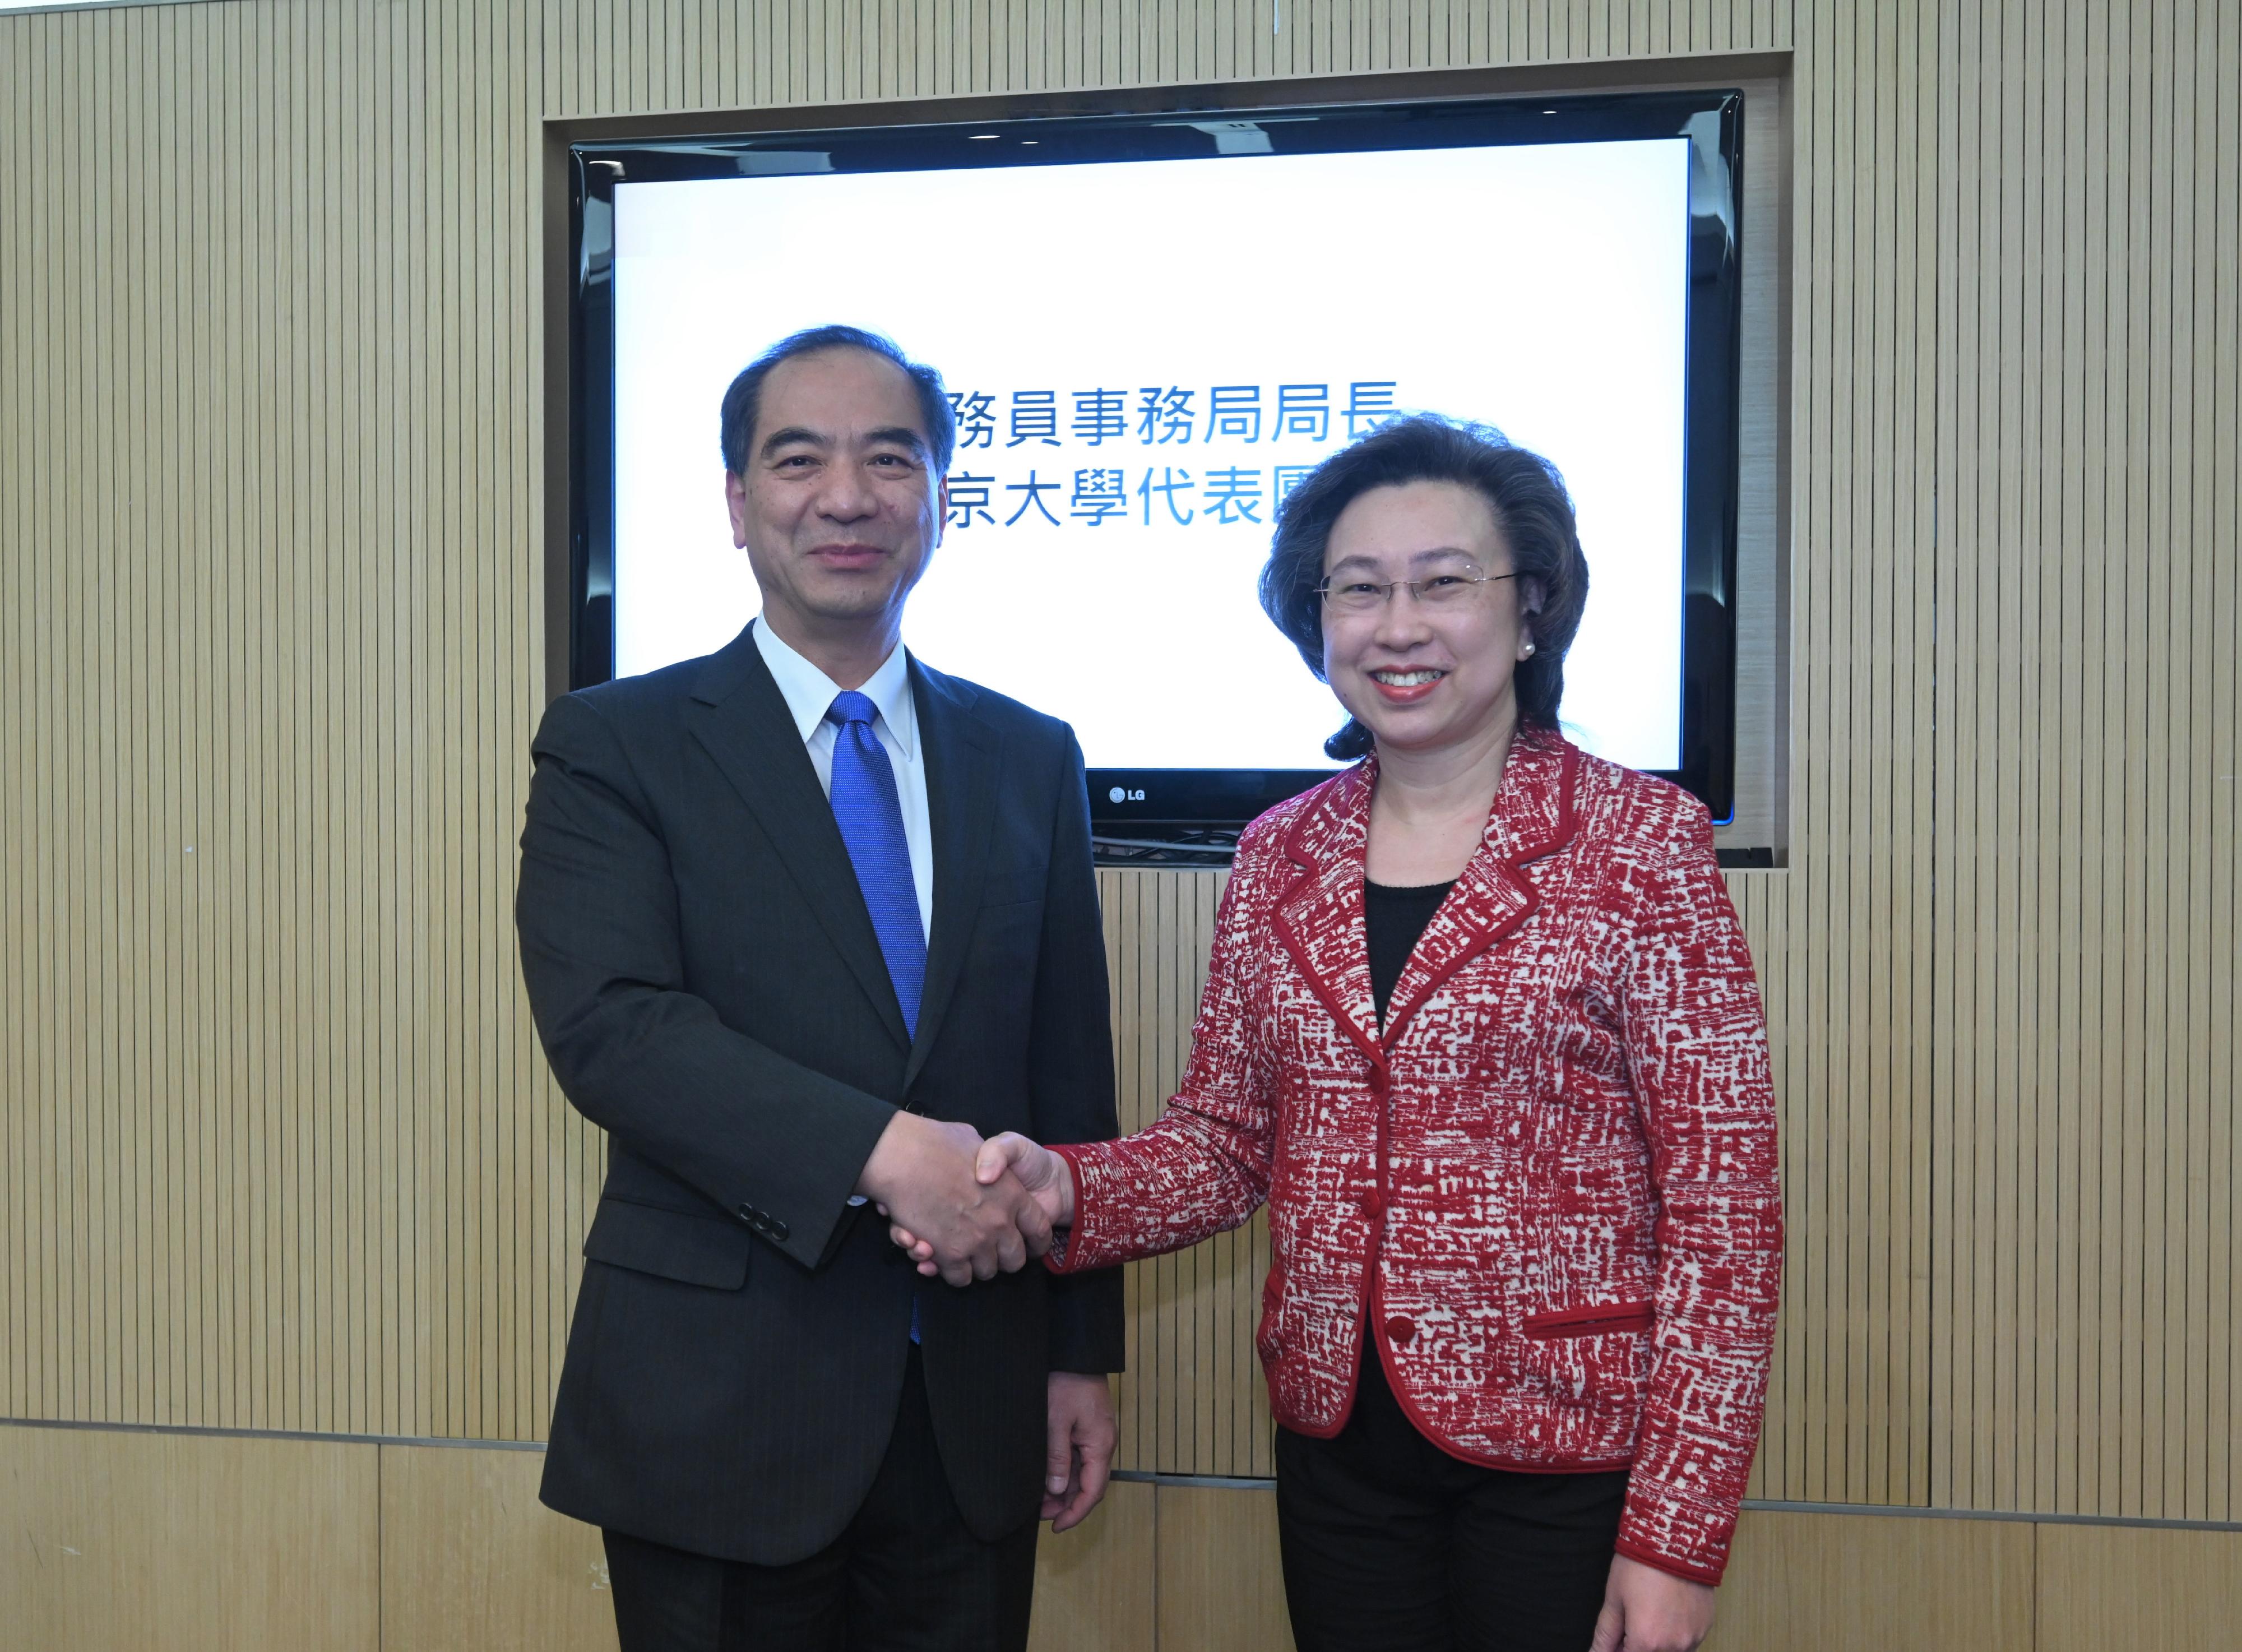 The Secretary for the Civil Service, Mrs Ingrid Yeung (right), met with a delegation from Peking University led by its President, Mr Gong Qihuang (left), at the Central Government Offices today (March 3) to exchange views on civil service training for the Hong Kong Special Administrative Region Government. Photo shows Mrs Yeung shaking Mr Gong's hand and welcoming the visiting delegation from Peking University.